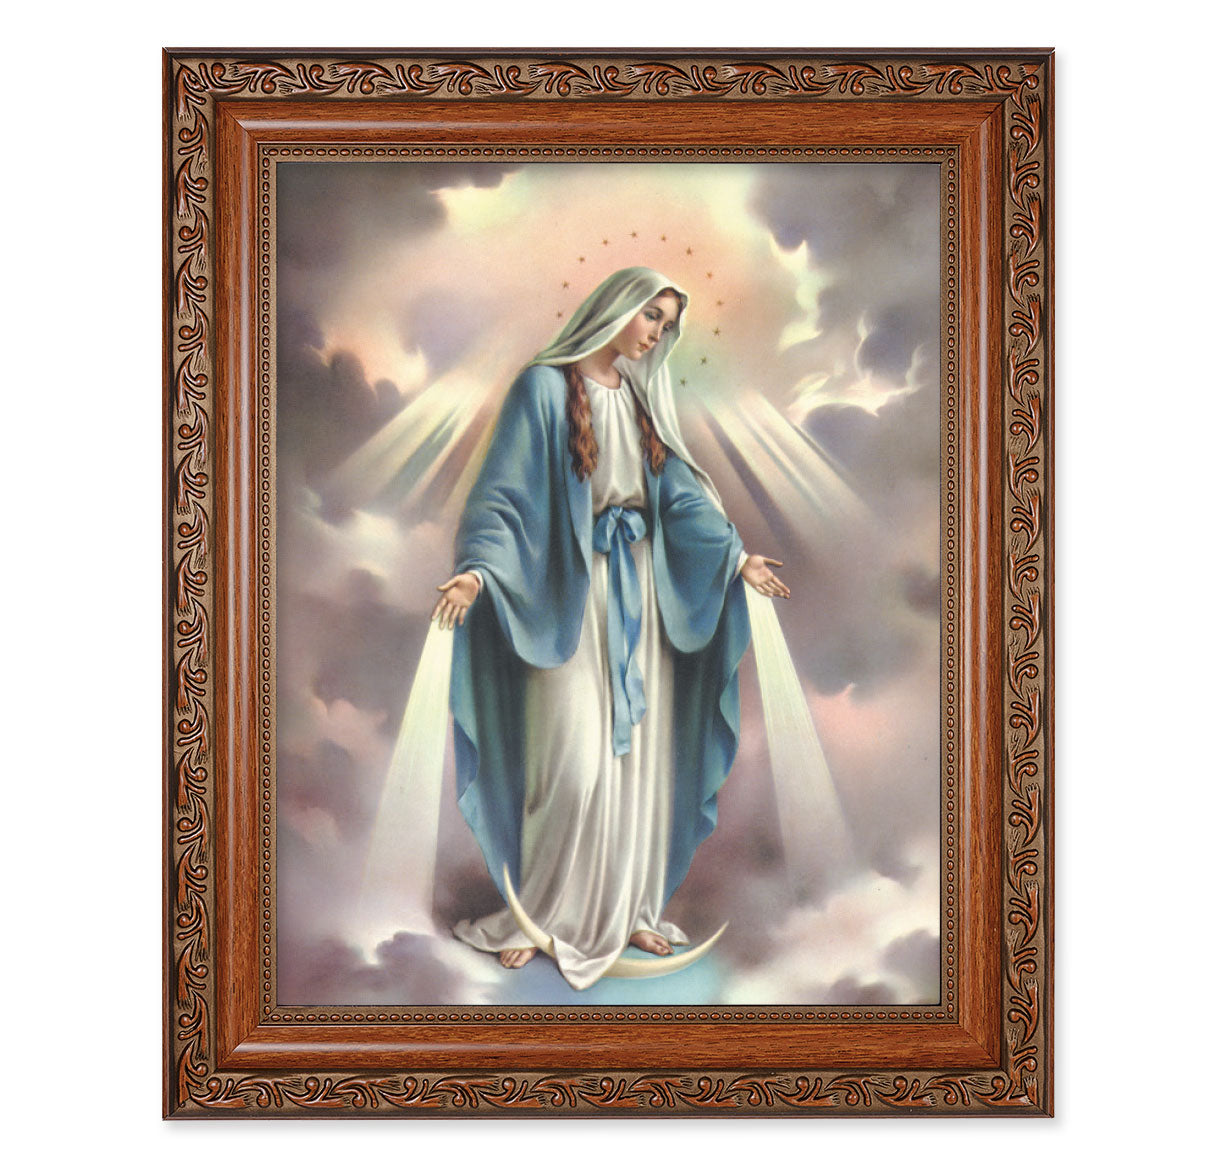 Our Lady of Grace Mahogany Finished Framed Art